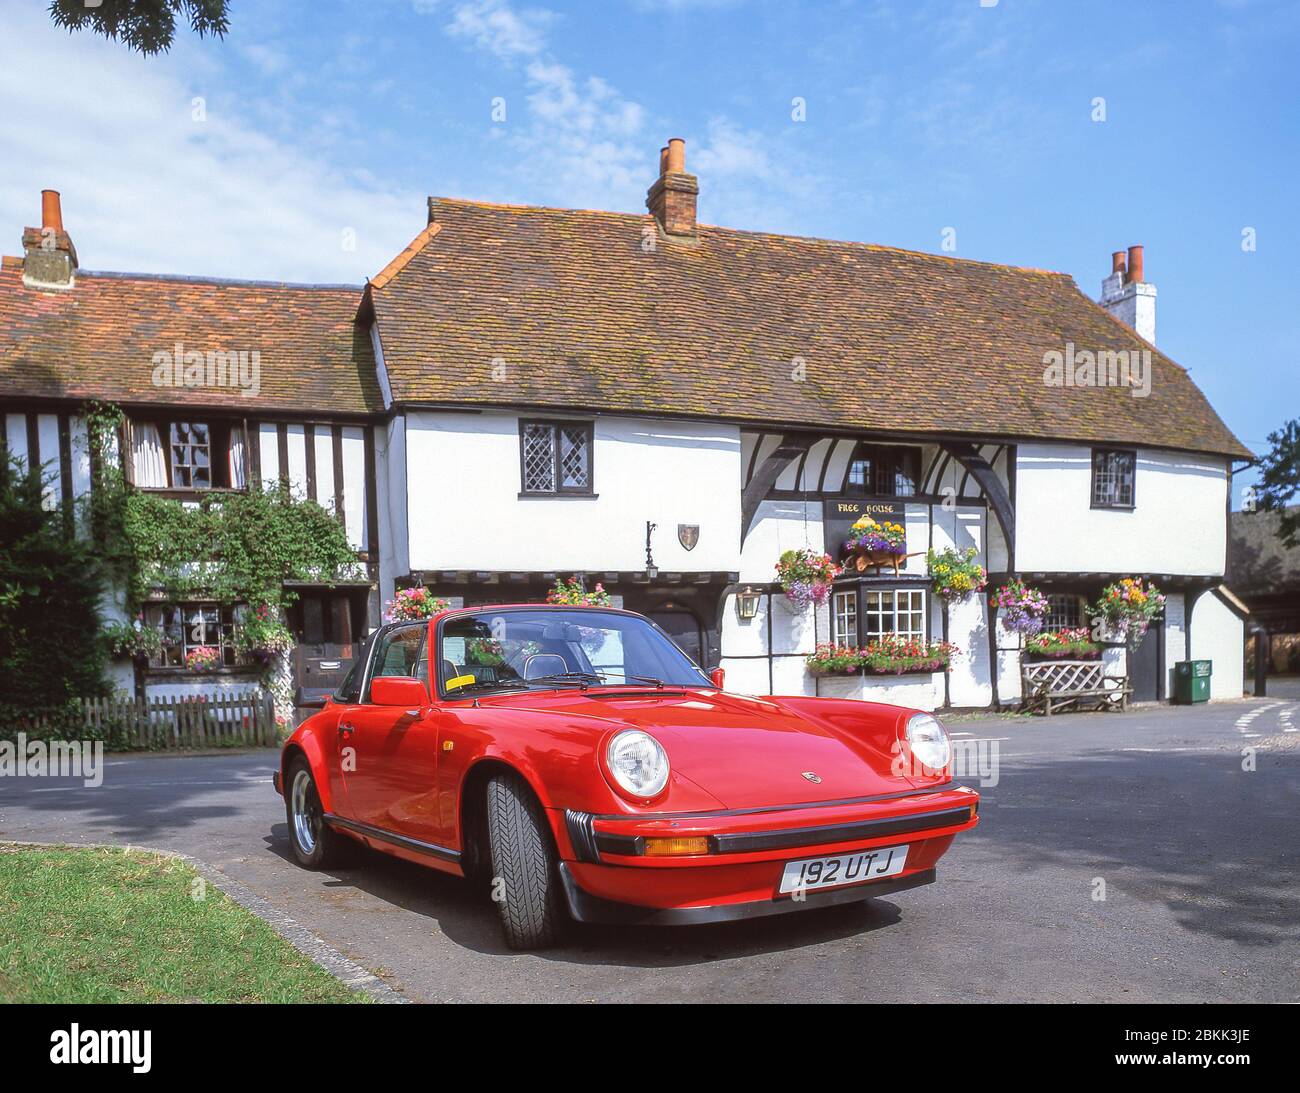 Classic Porsche 911 Carrera in front of The Bell Inn, Waltham St.Lawrence, Berkshire, England, United Kingdom Stock Photo